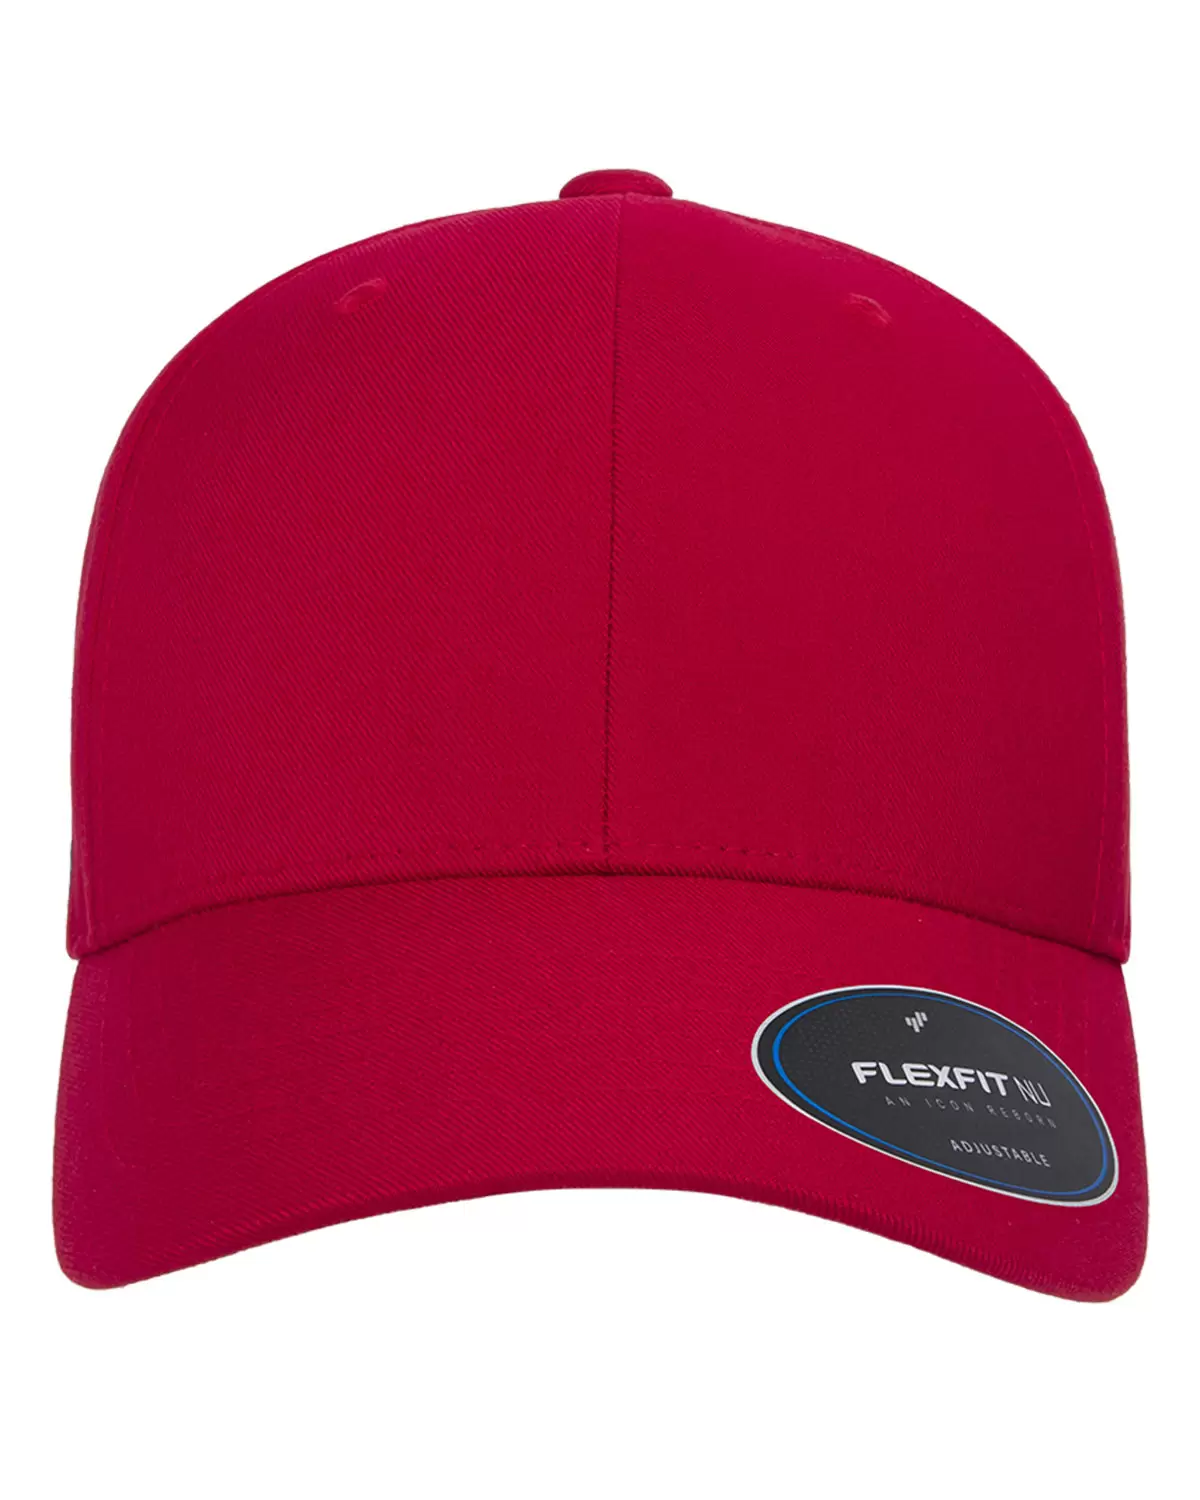 Yupoong-Flex Fit 6110NU Adjustable Cap From - NU